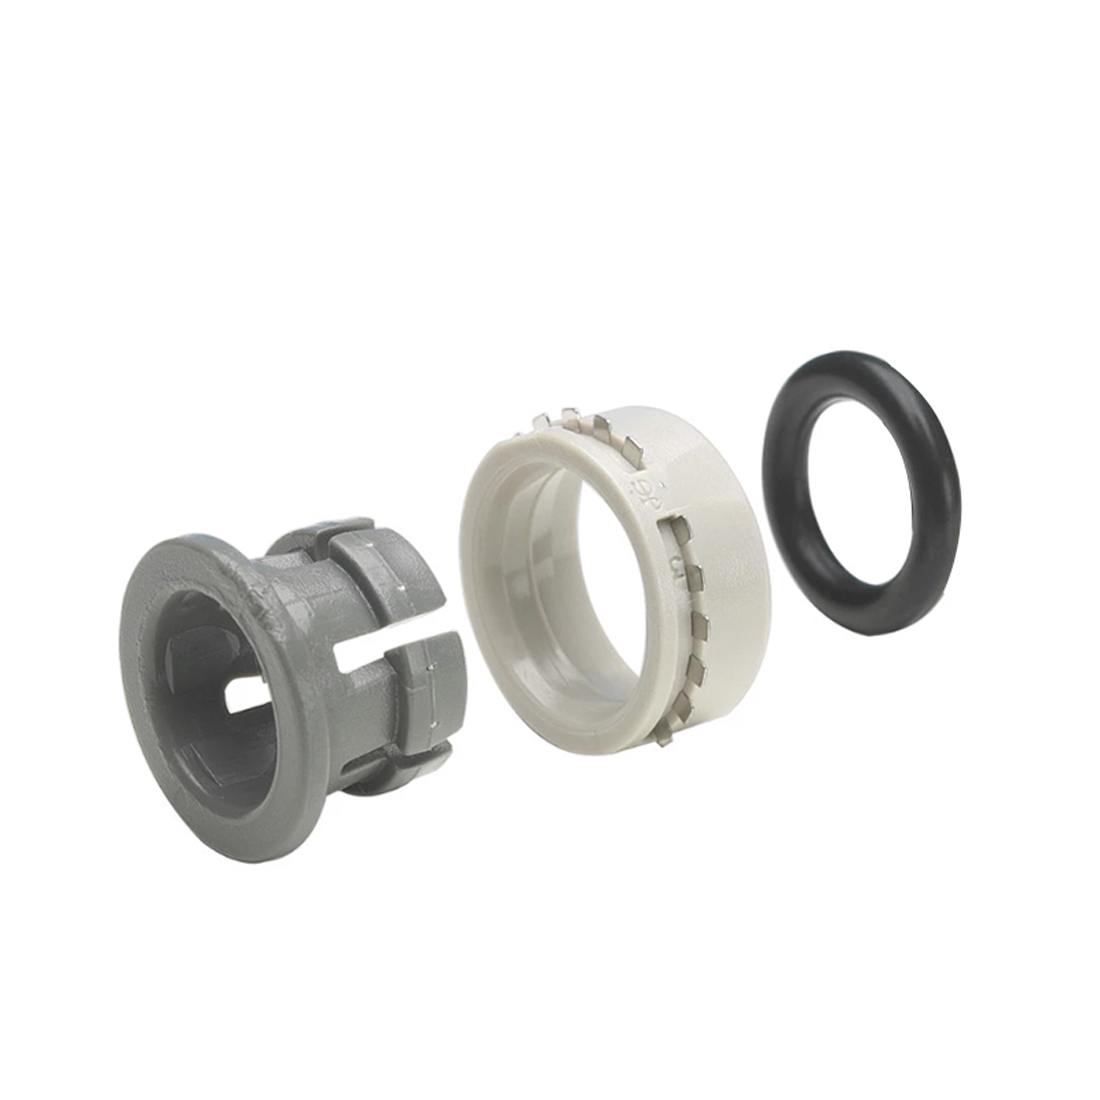 RHG Collet, O-Ring, and Cartridge - Gray - Disassembled View